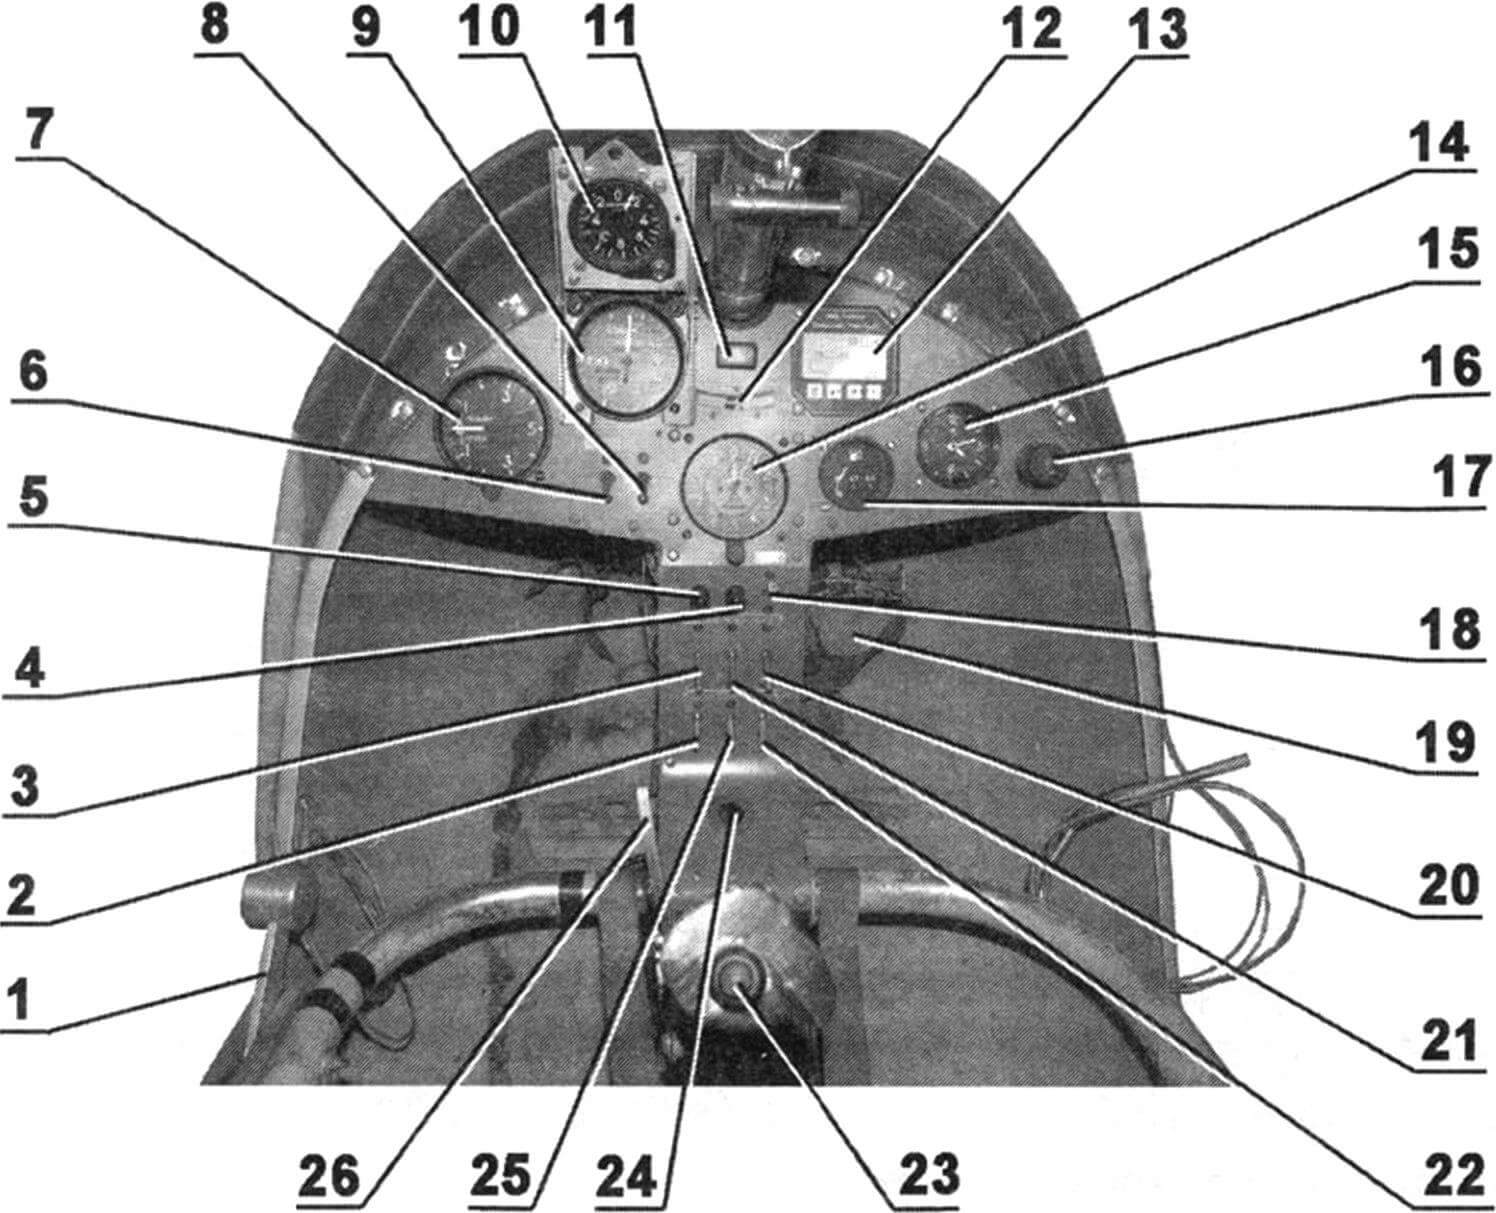 Instrument panel and main controls